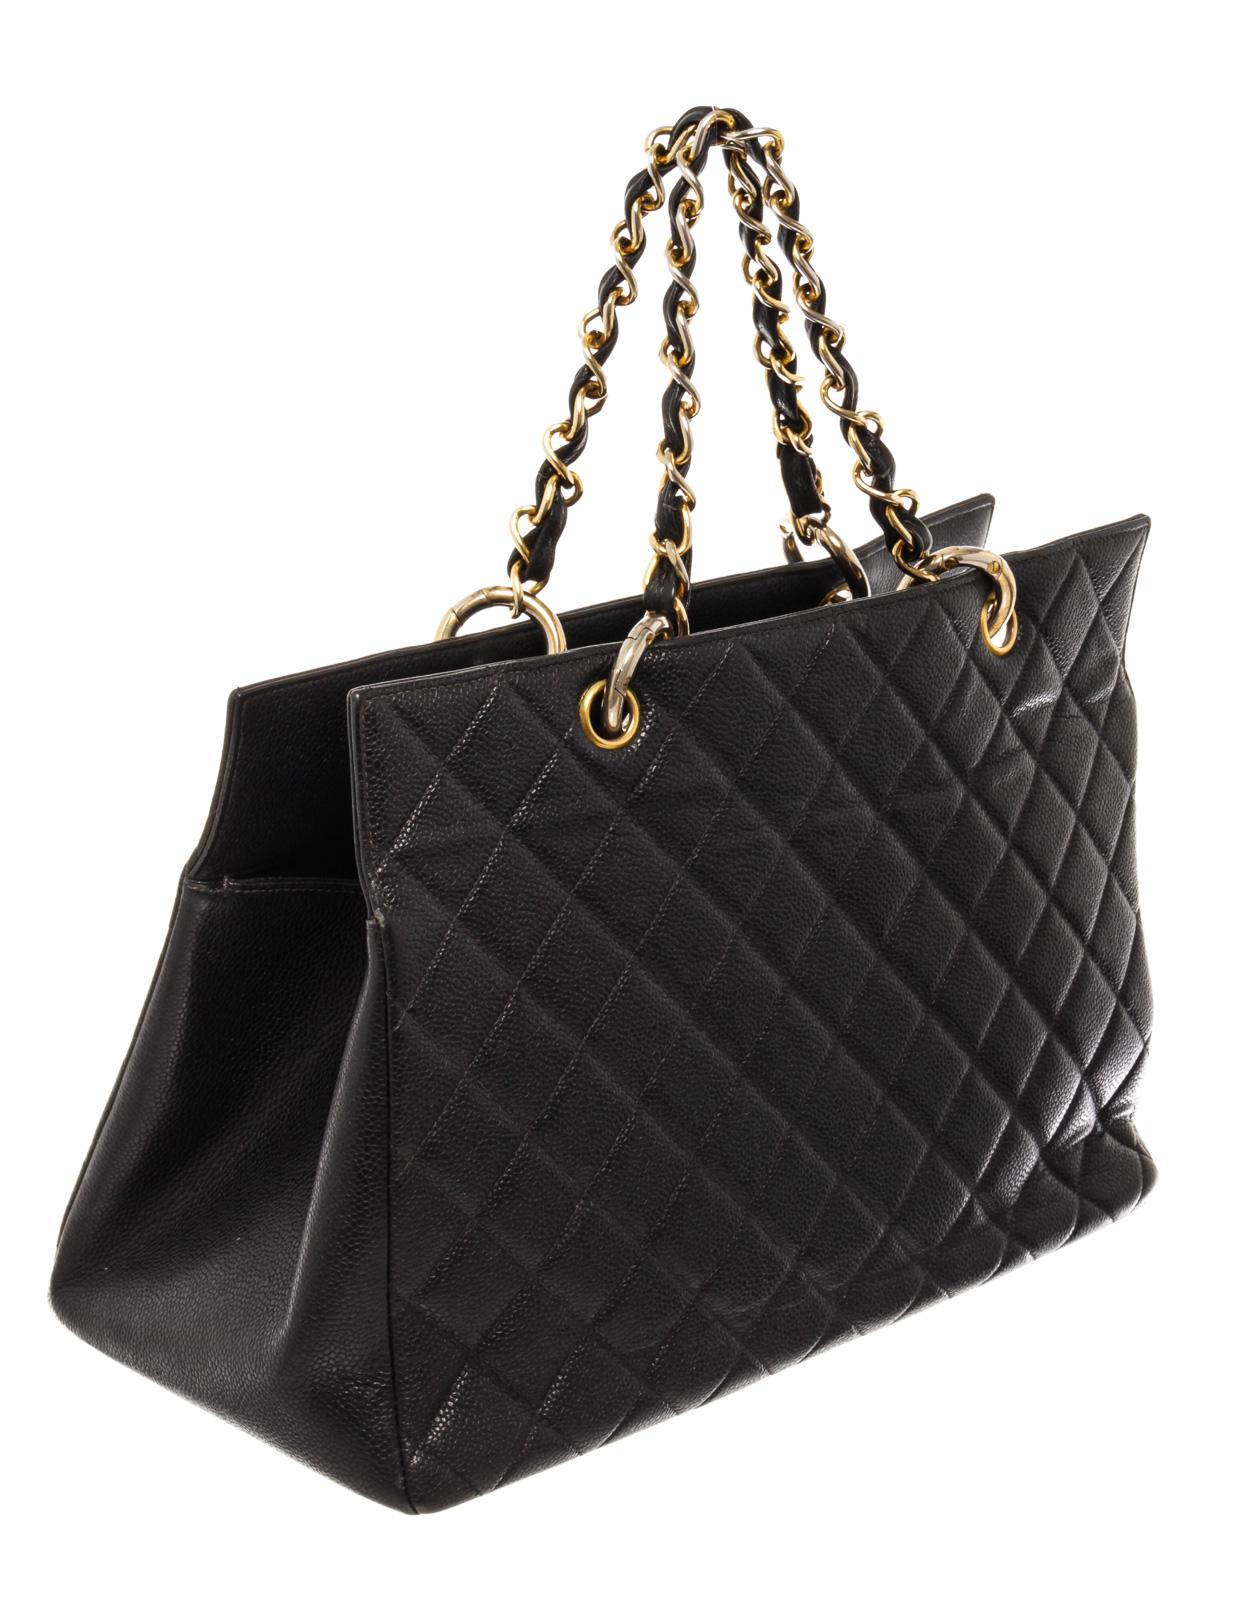 Chanel Black Quilted Lambskin Leather Timeless Grand Shopping Tote Bag In Good Condition For Sale In Irvine, CA